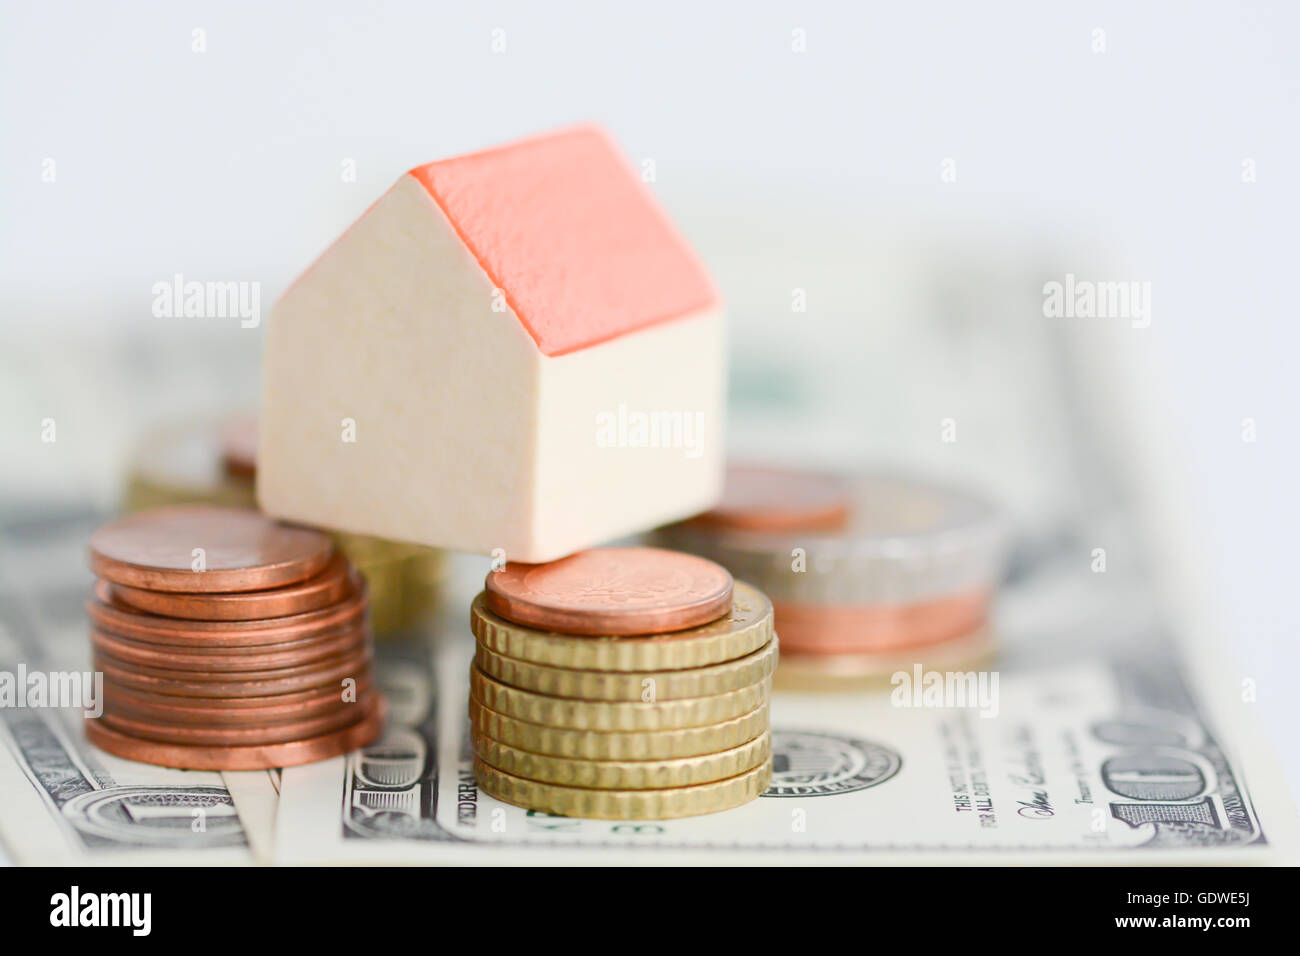 House property prices concept with money pillars from coins Stock Photo